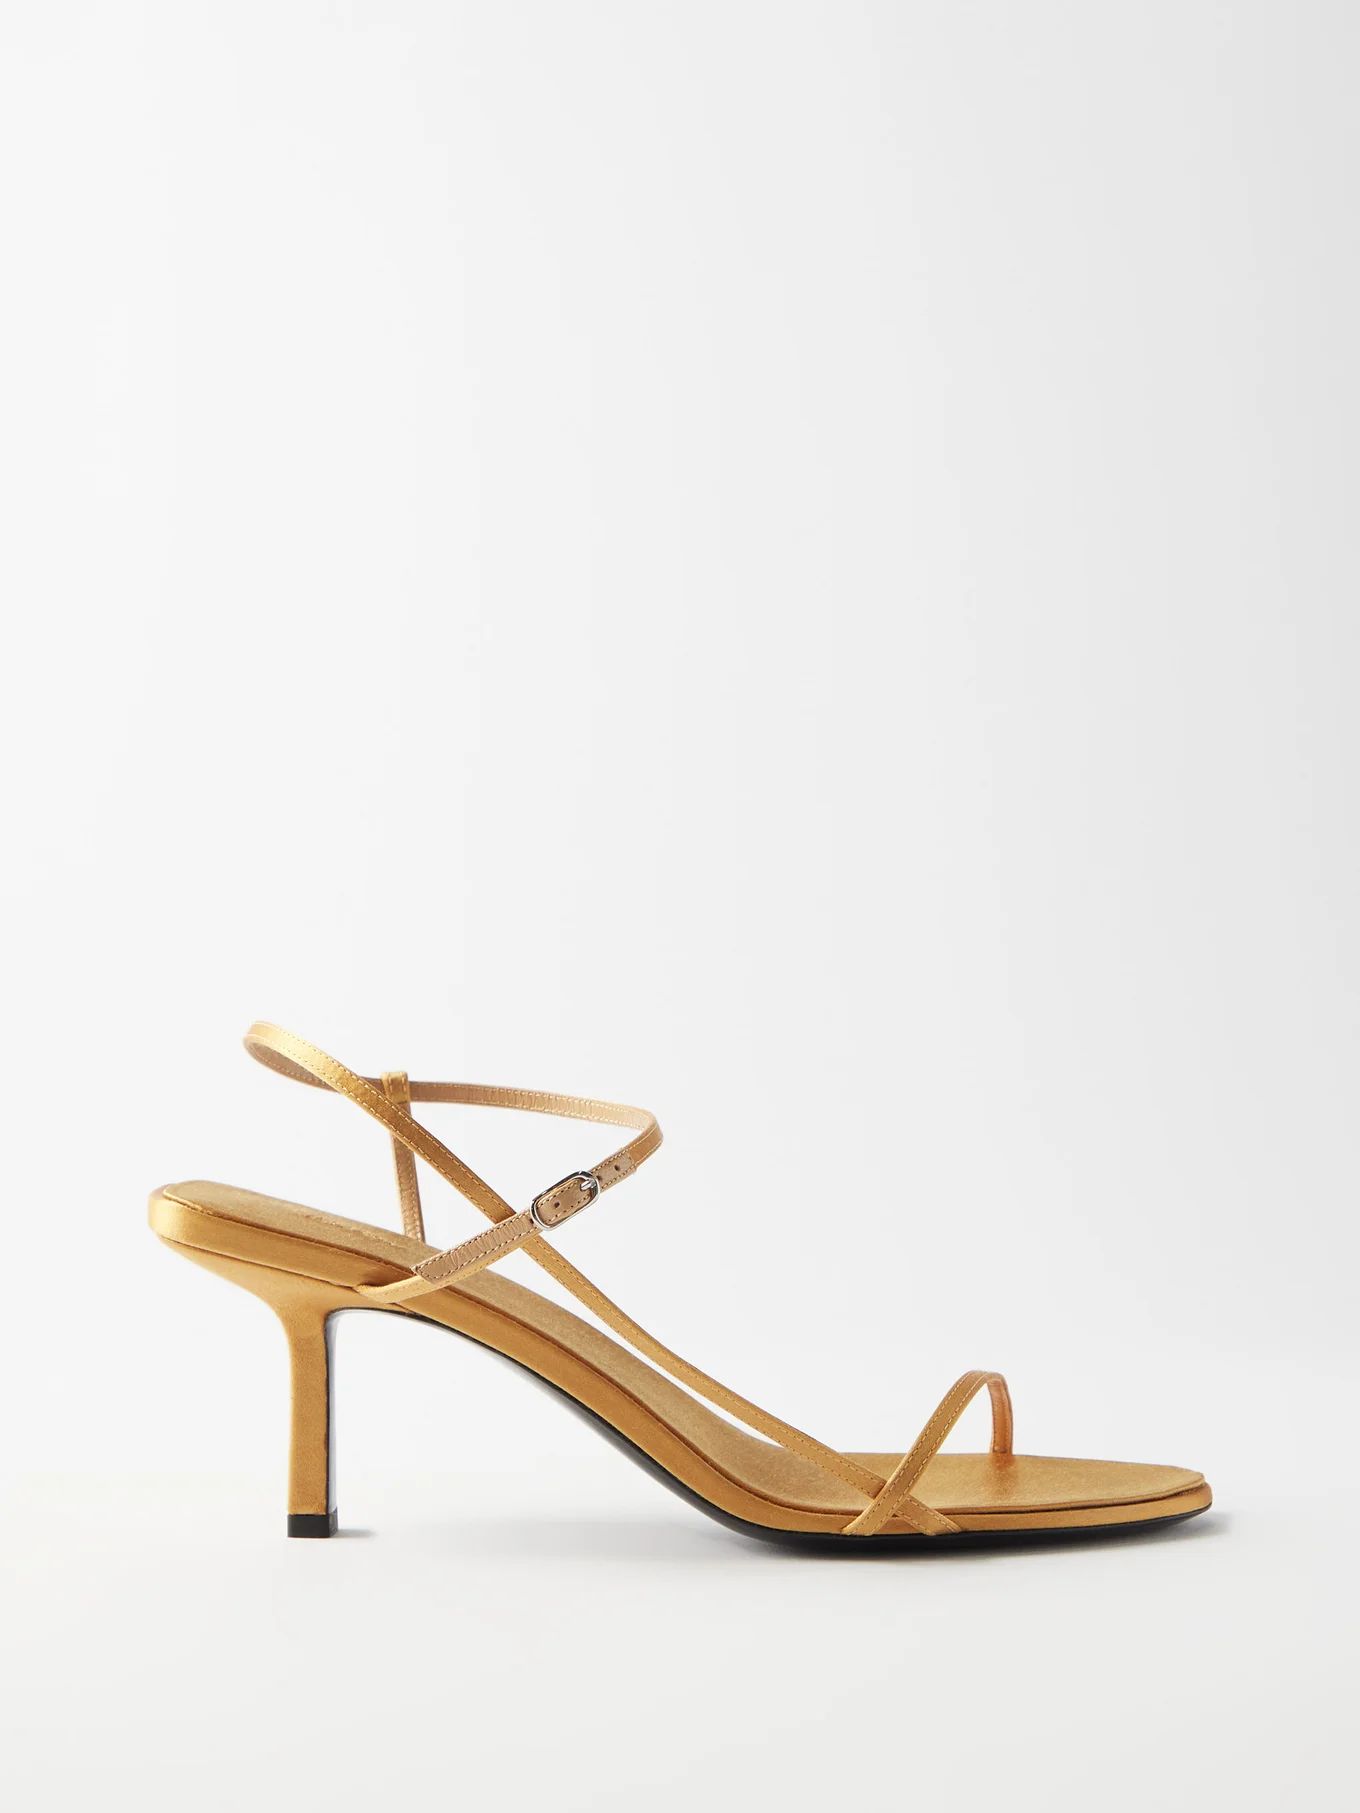 Bare 65 satin sandals | The Row | Matches (UK)